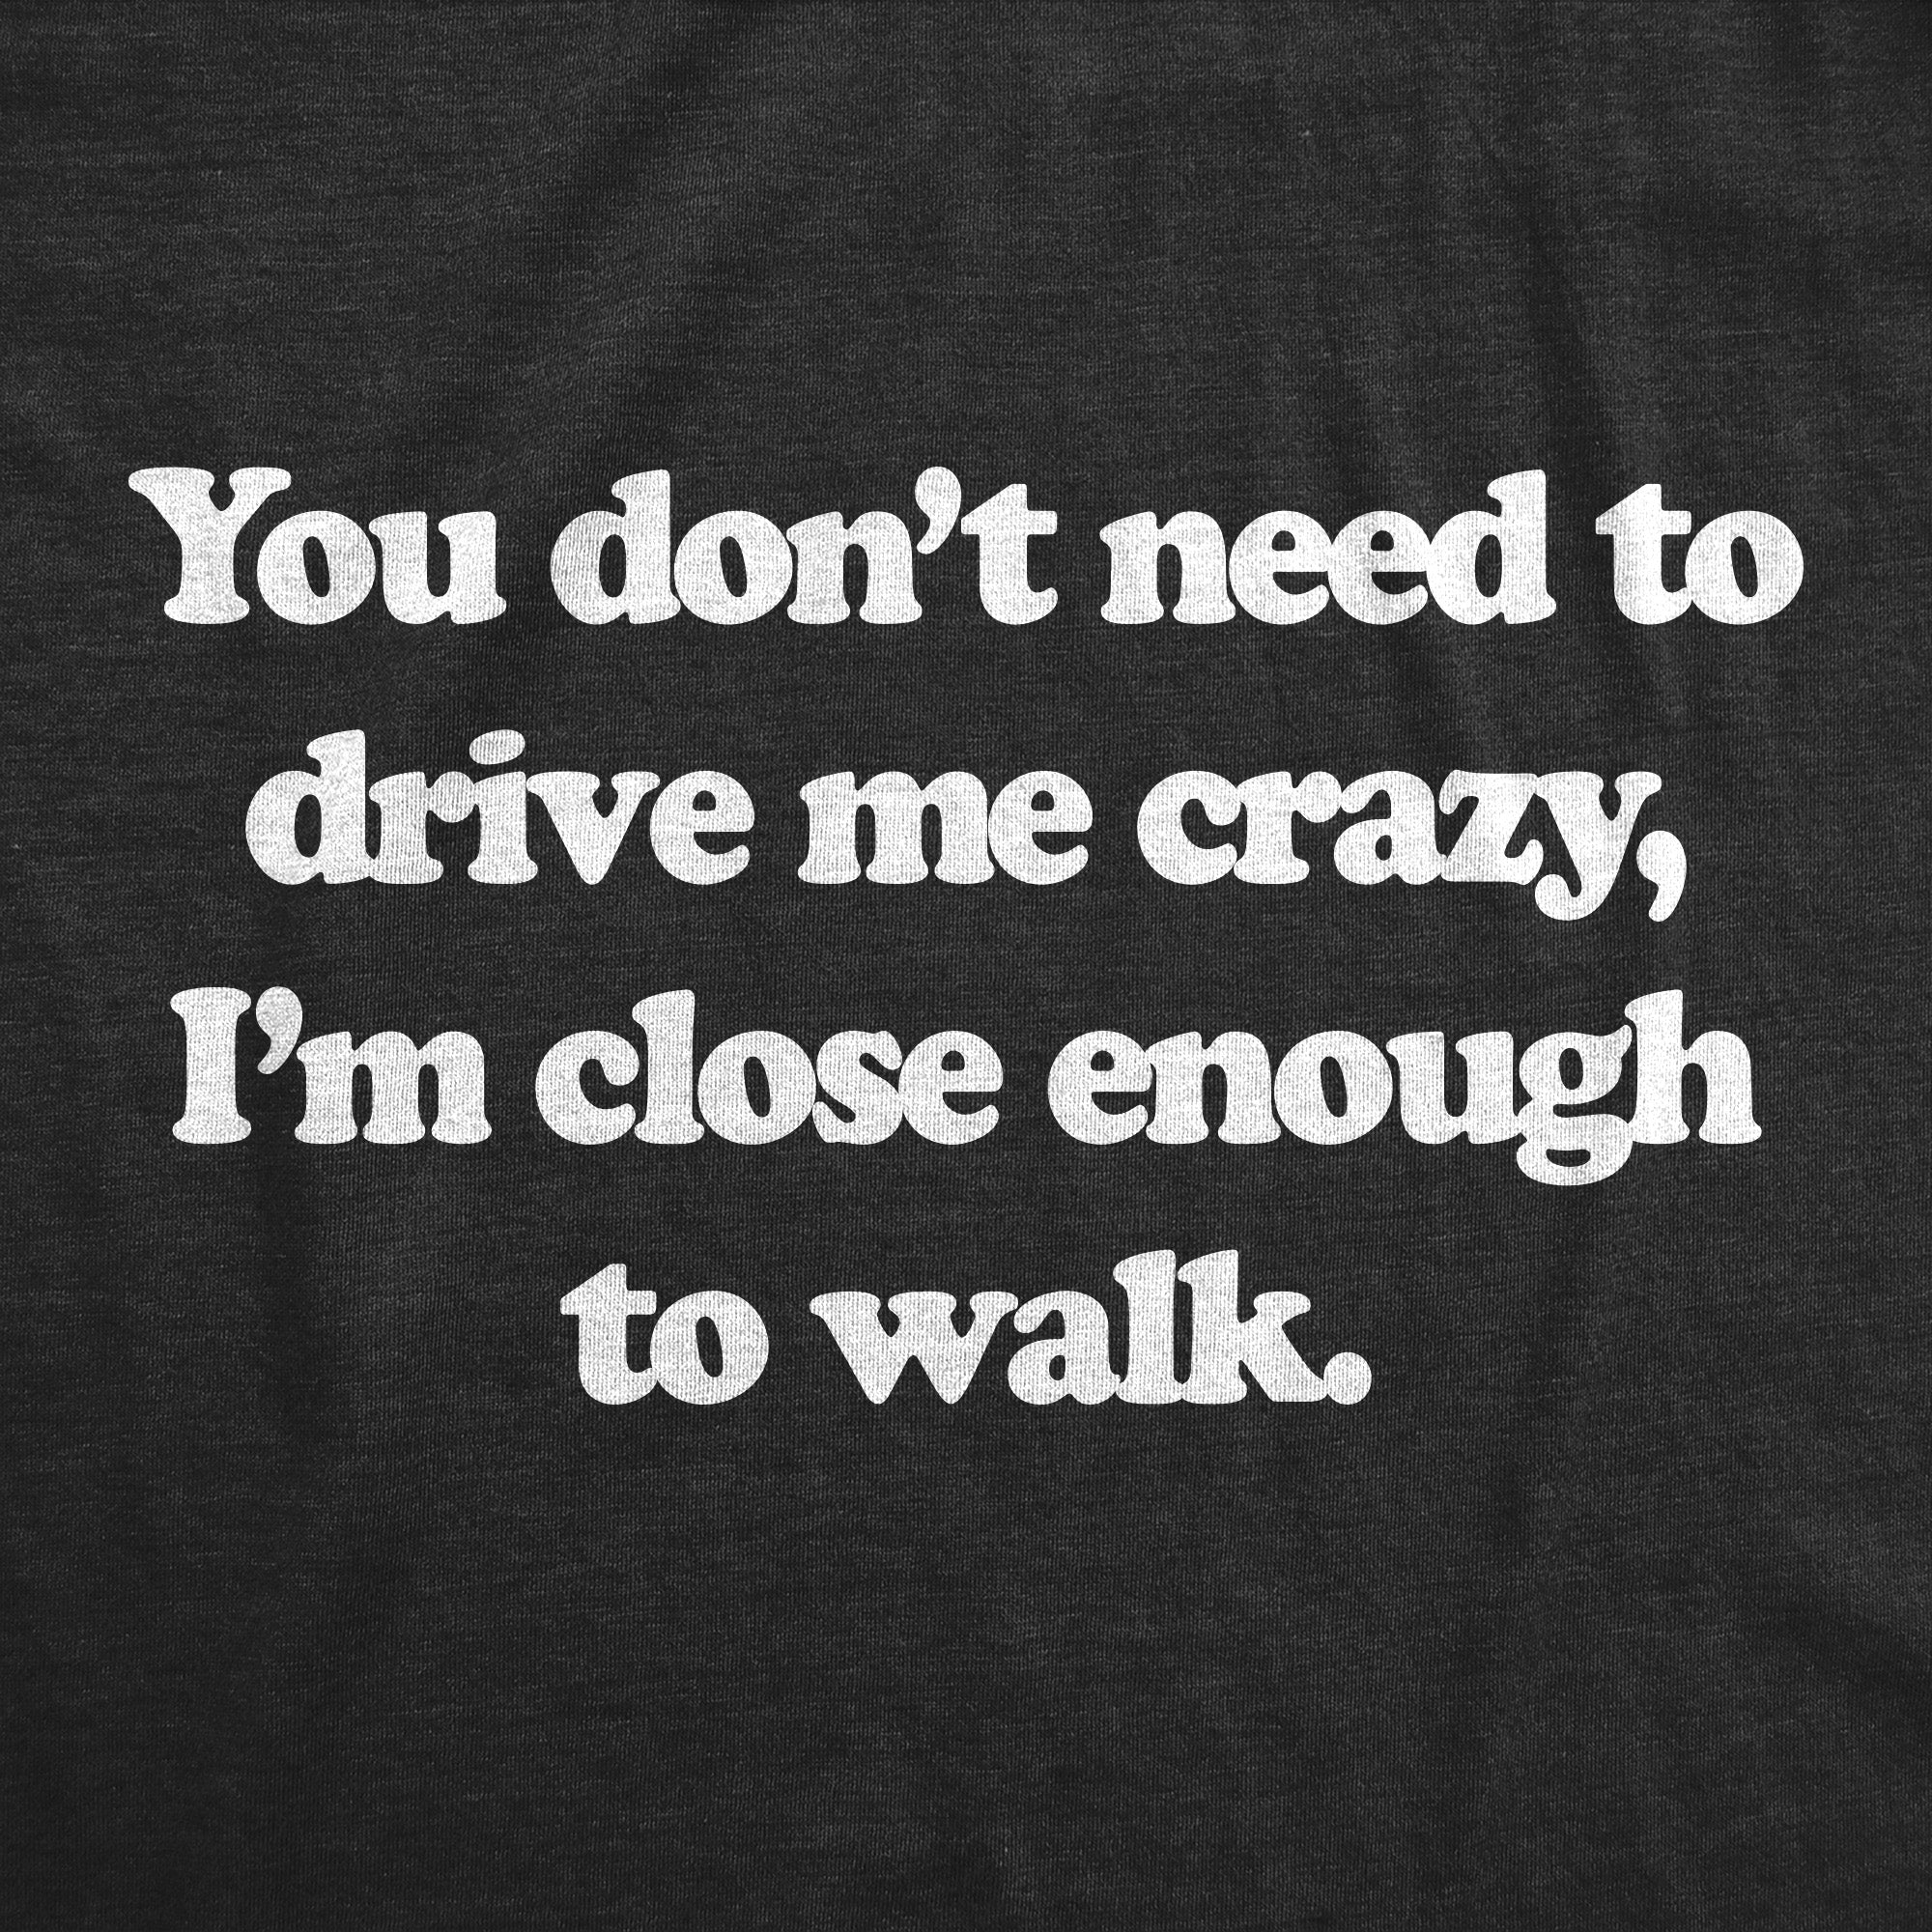 Funny Heather Black - CRAZY You Dont Need To Drive Me Crazy Im Close Enough To Walk Womens T Shirt Nerdy Sarcastic Tee